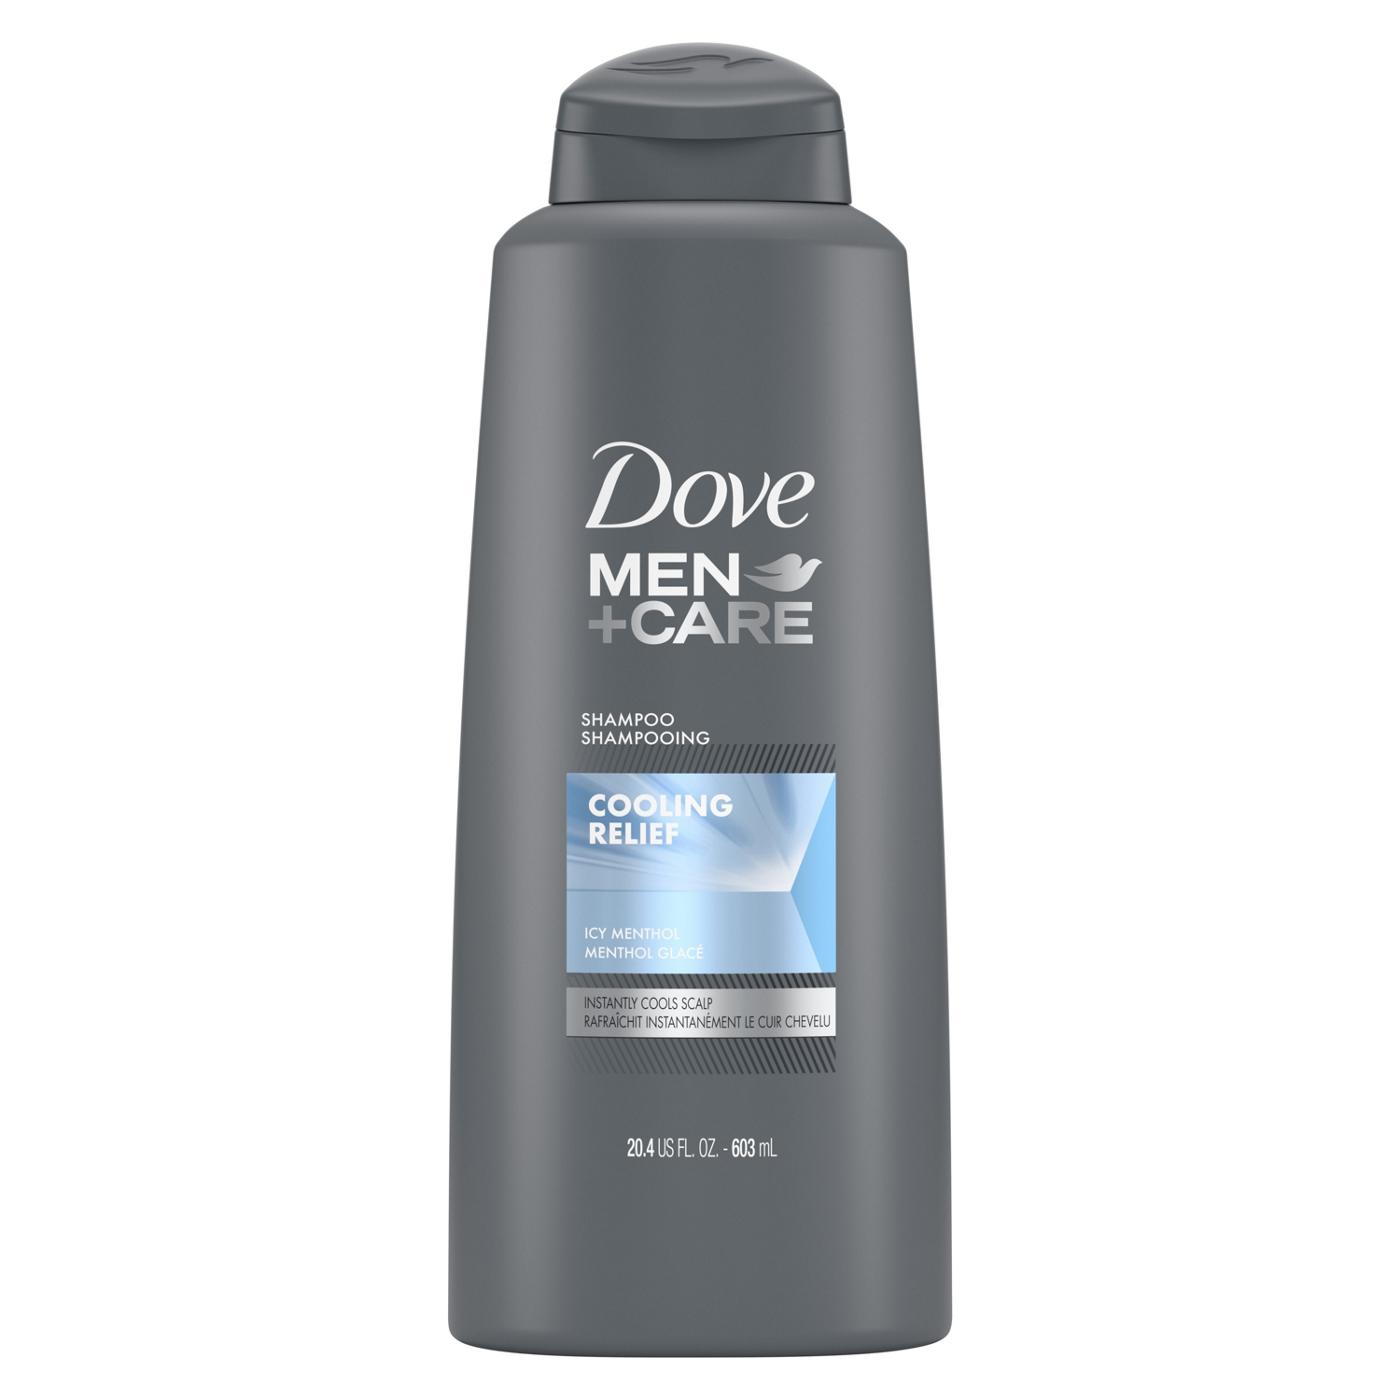 Dove Men+Care Fortifying Shampoo - Cooling Relief; image 1 of 6